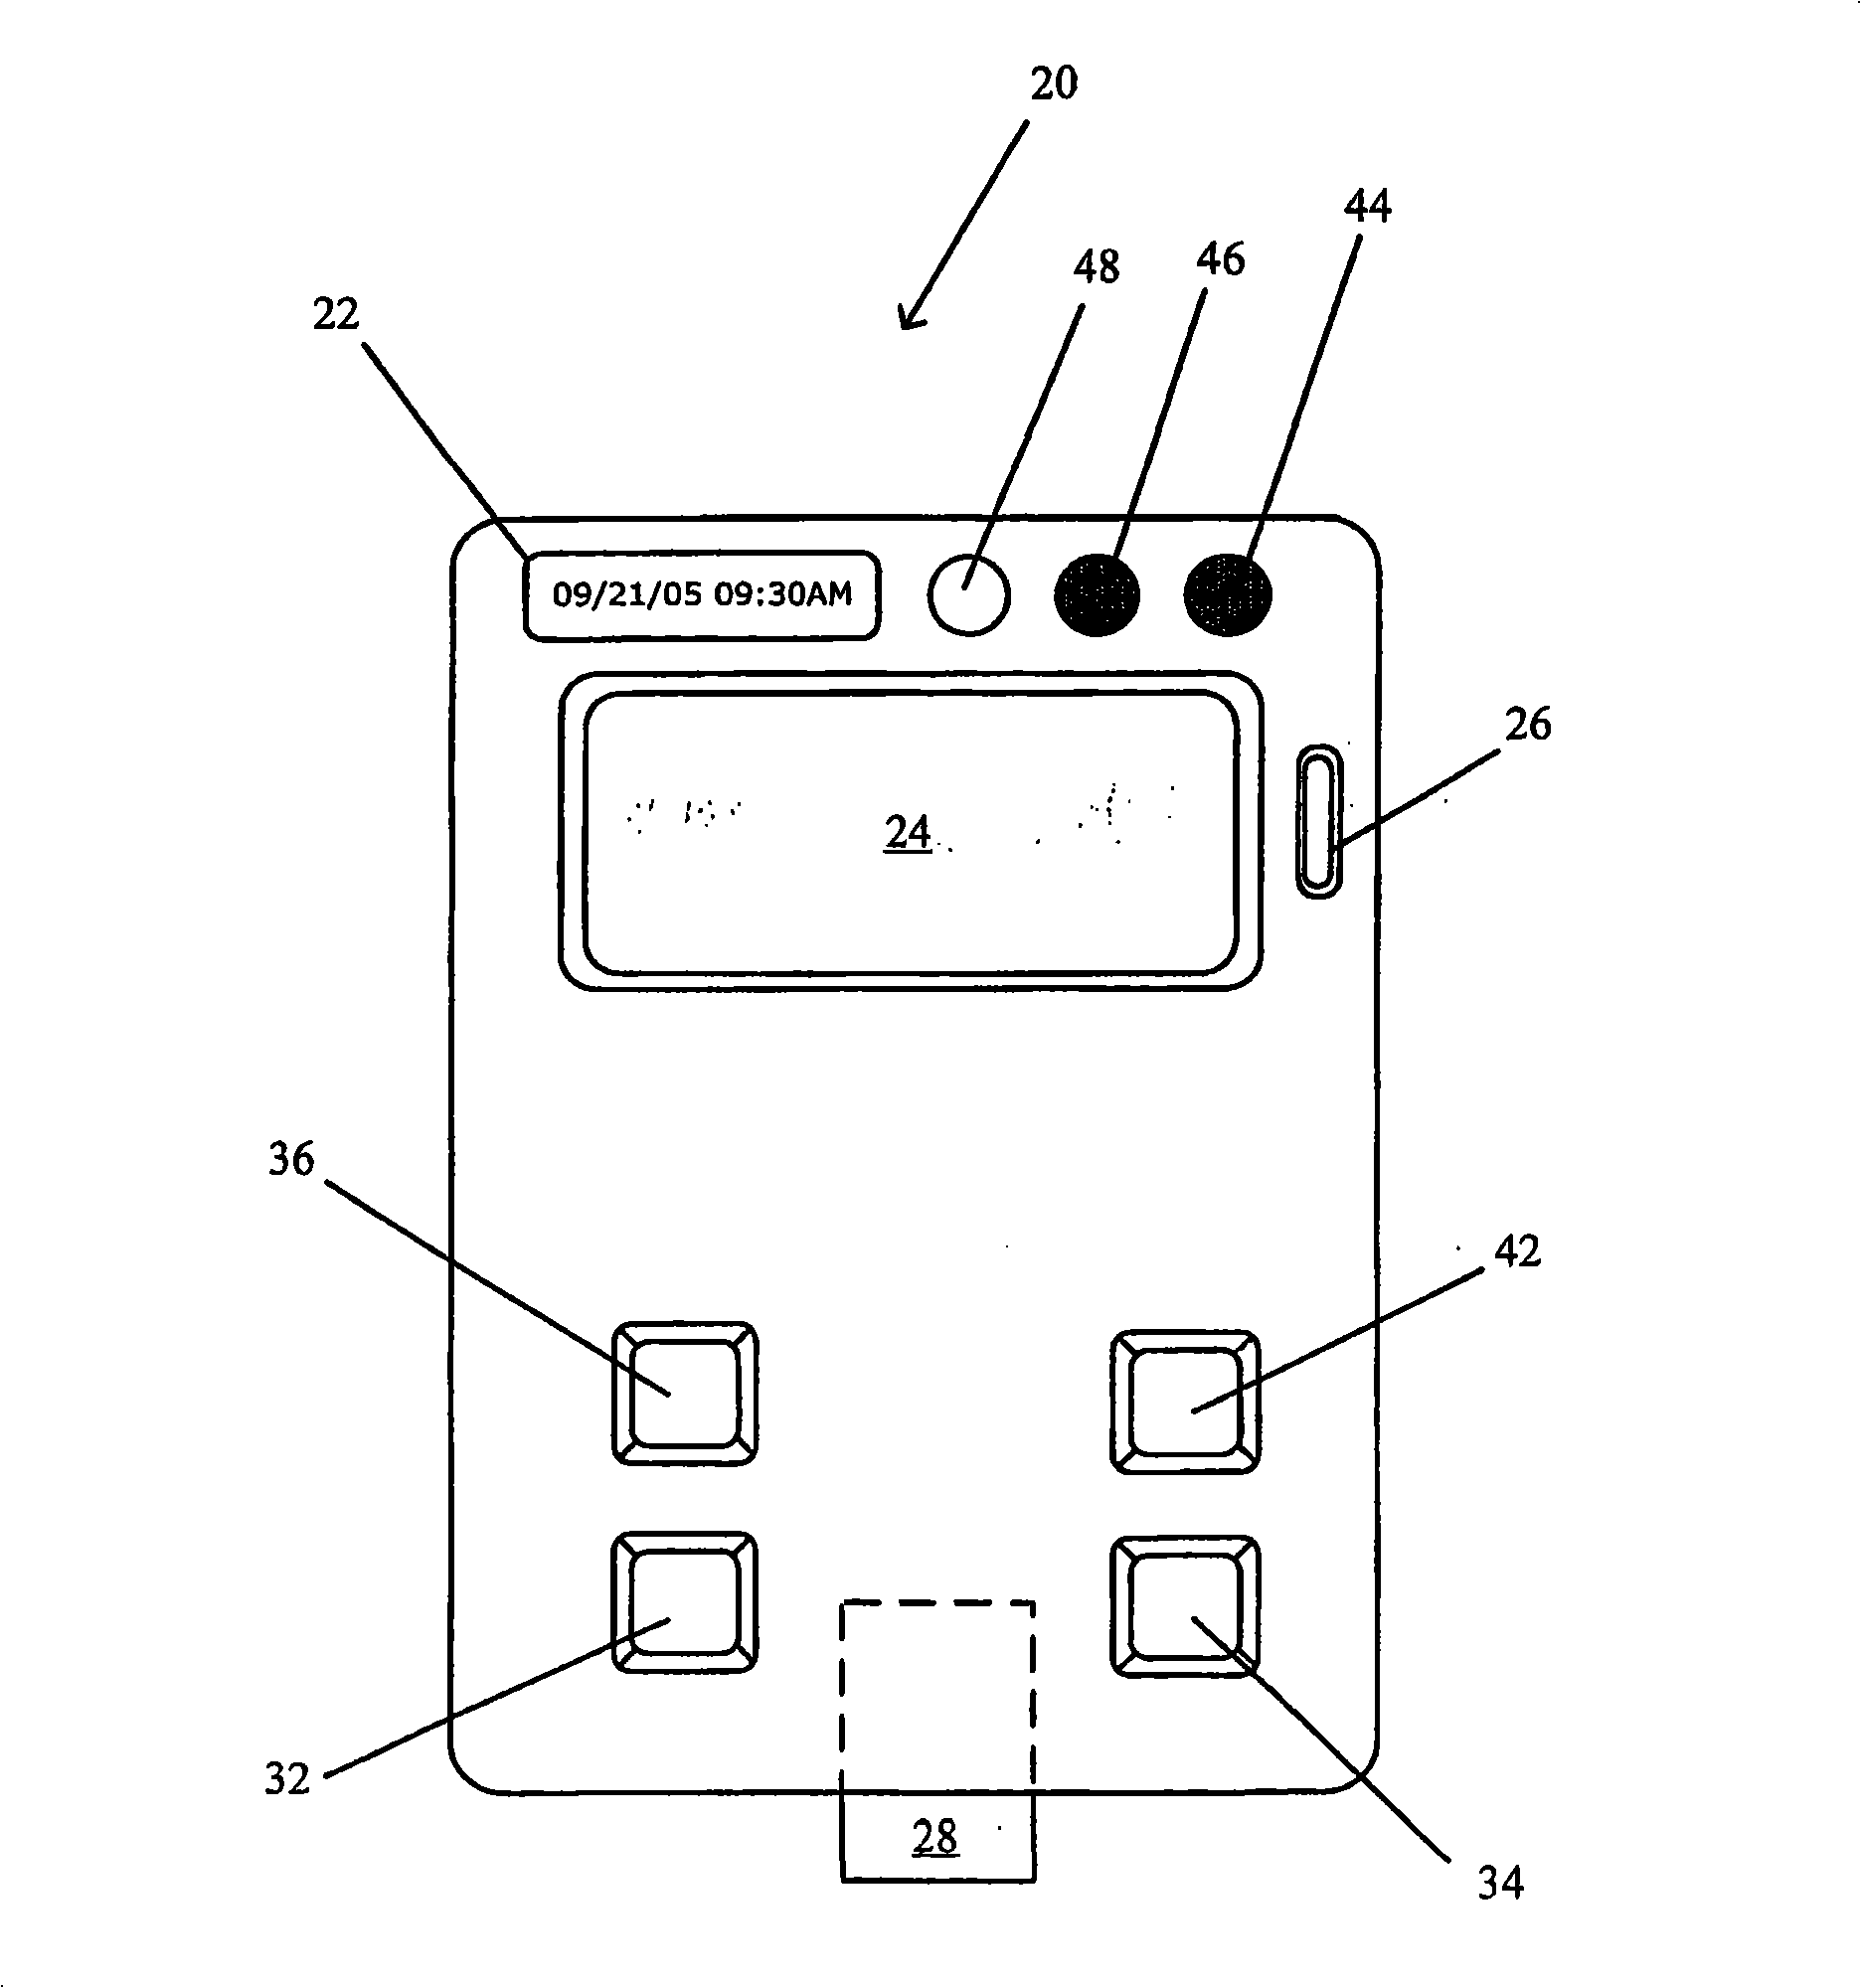 Systems and methods for non-invasive detection and monitoring of cardiac and blood parameters